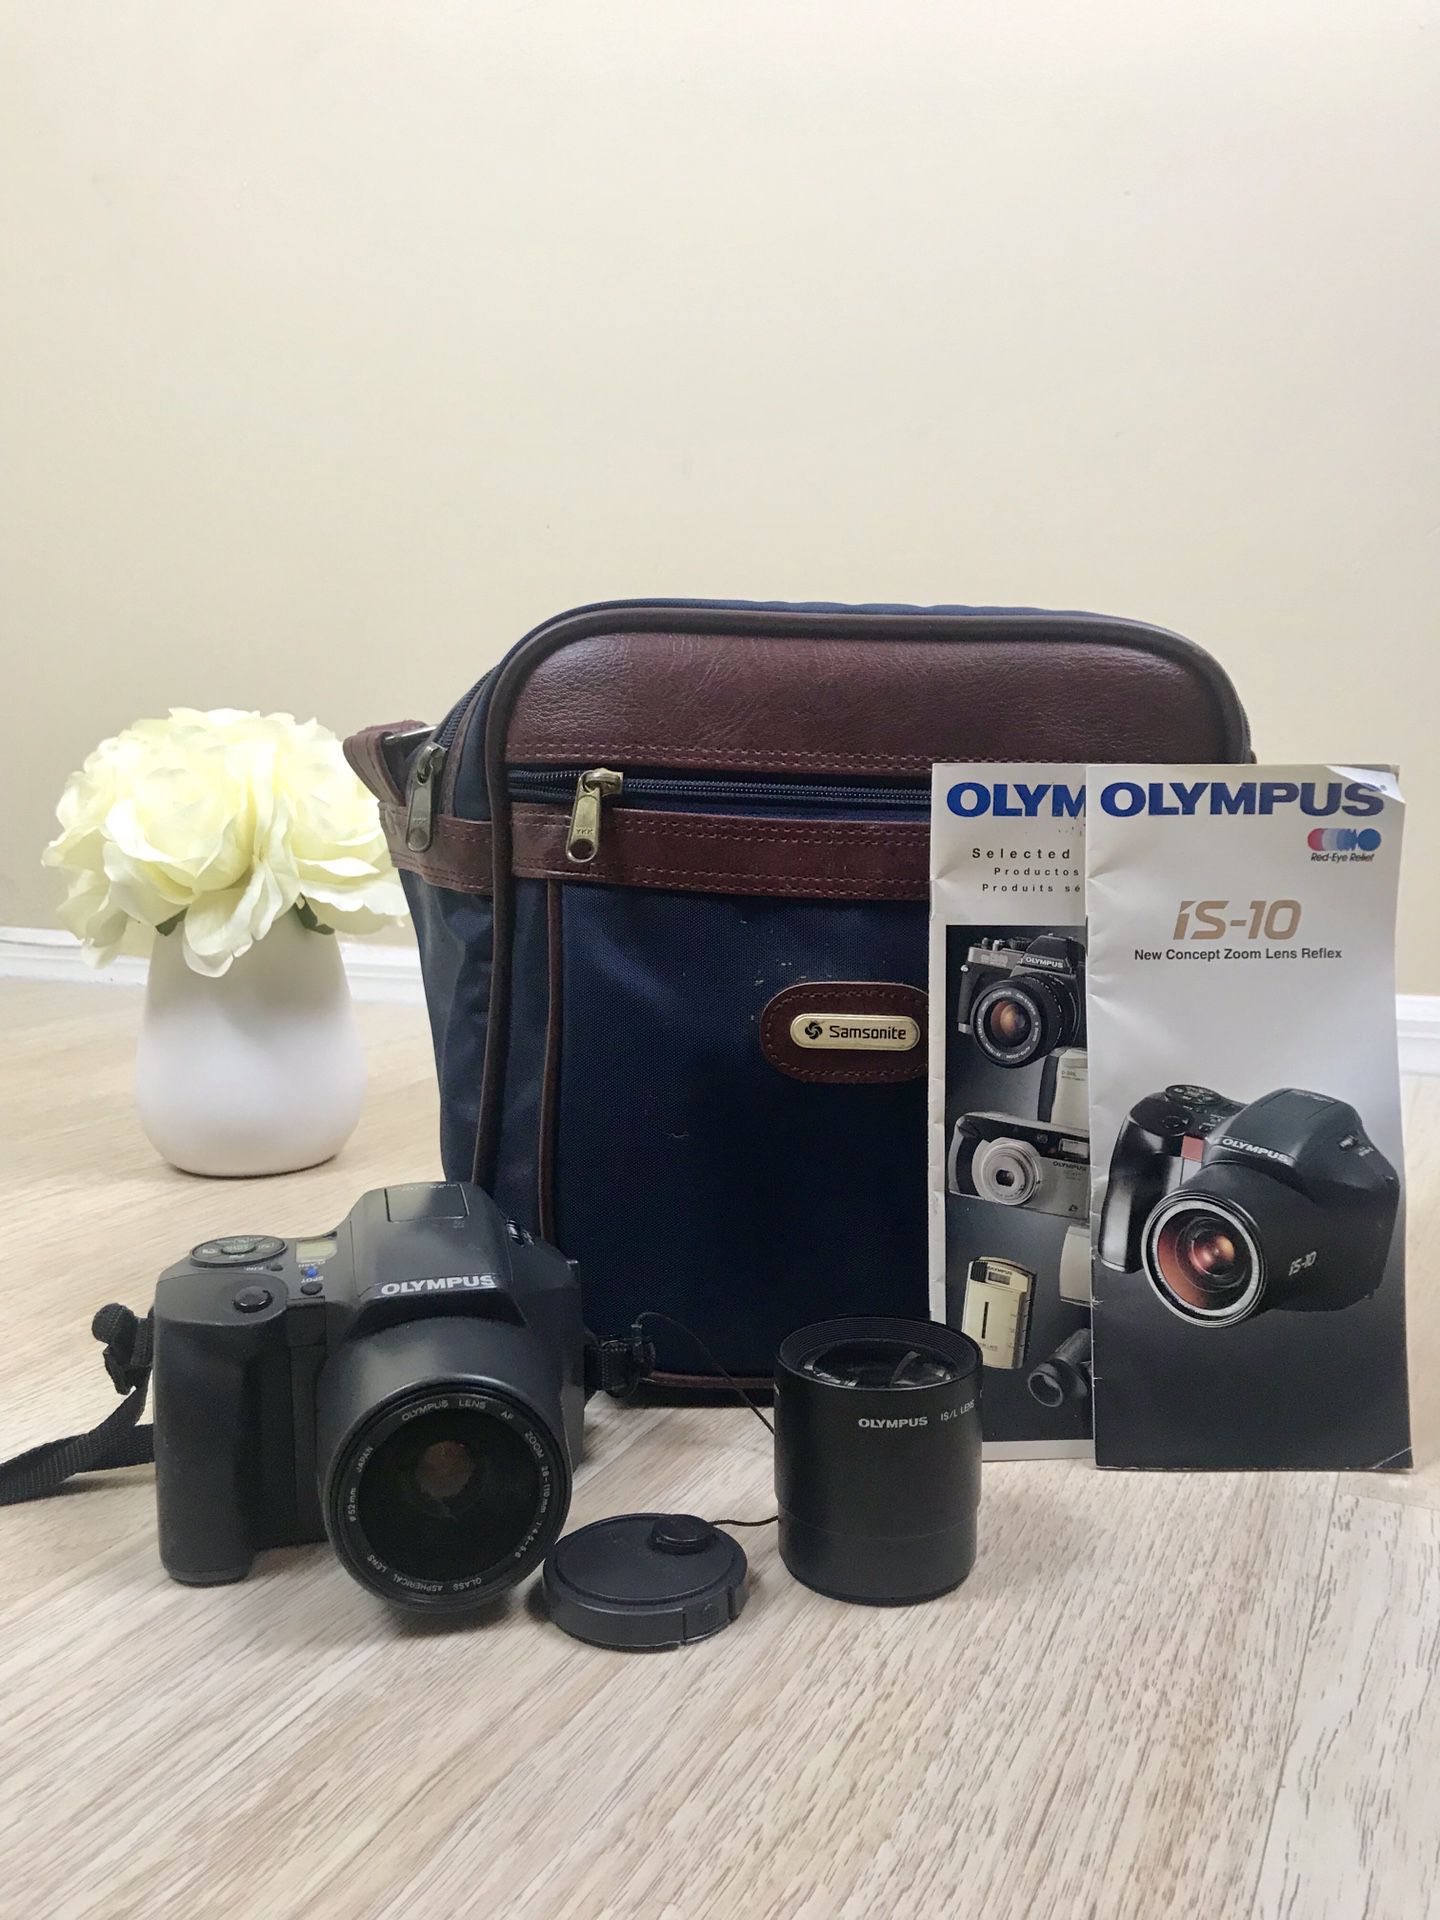 OLYMPUS IS-10 DLX POINT AND SHOOT 35MM SLR FILM CAMERA.